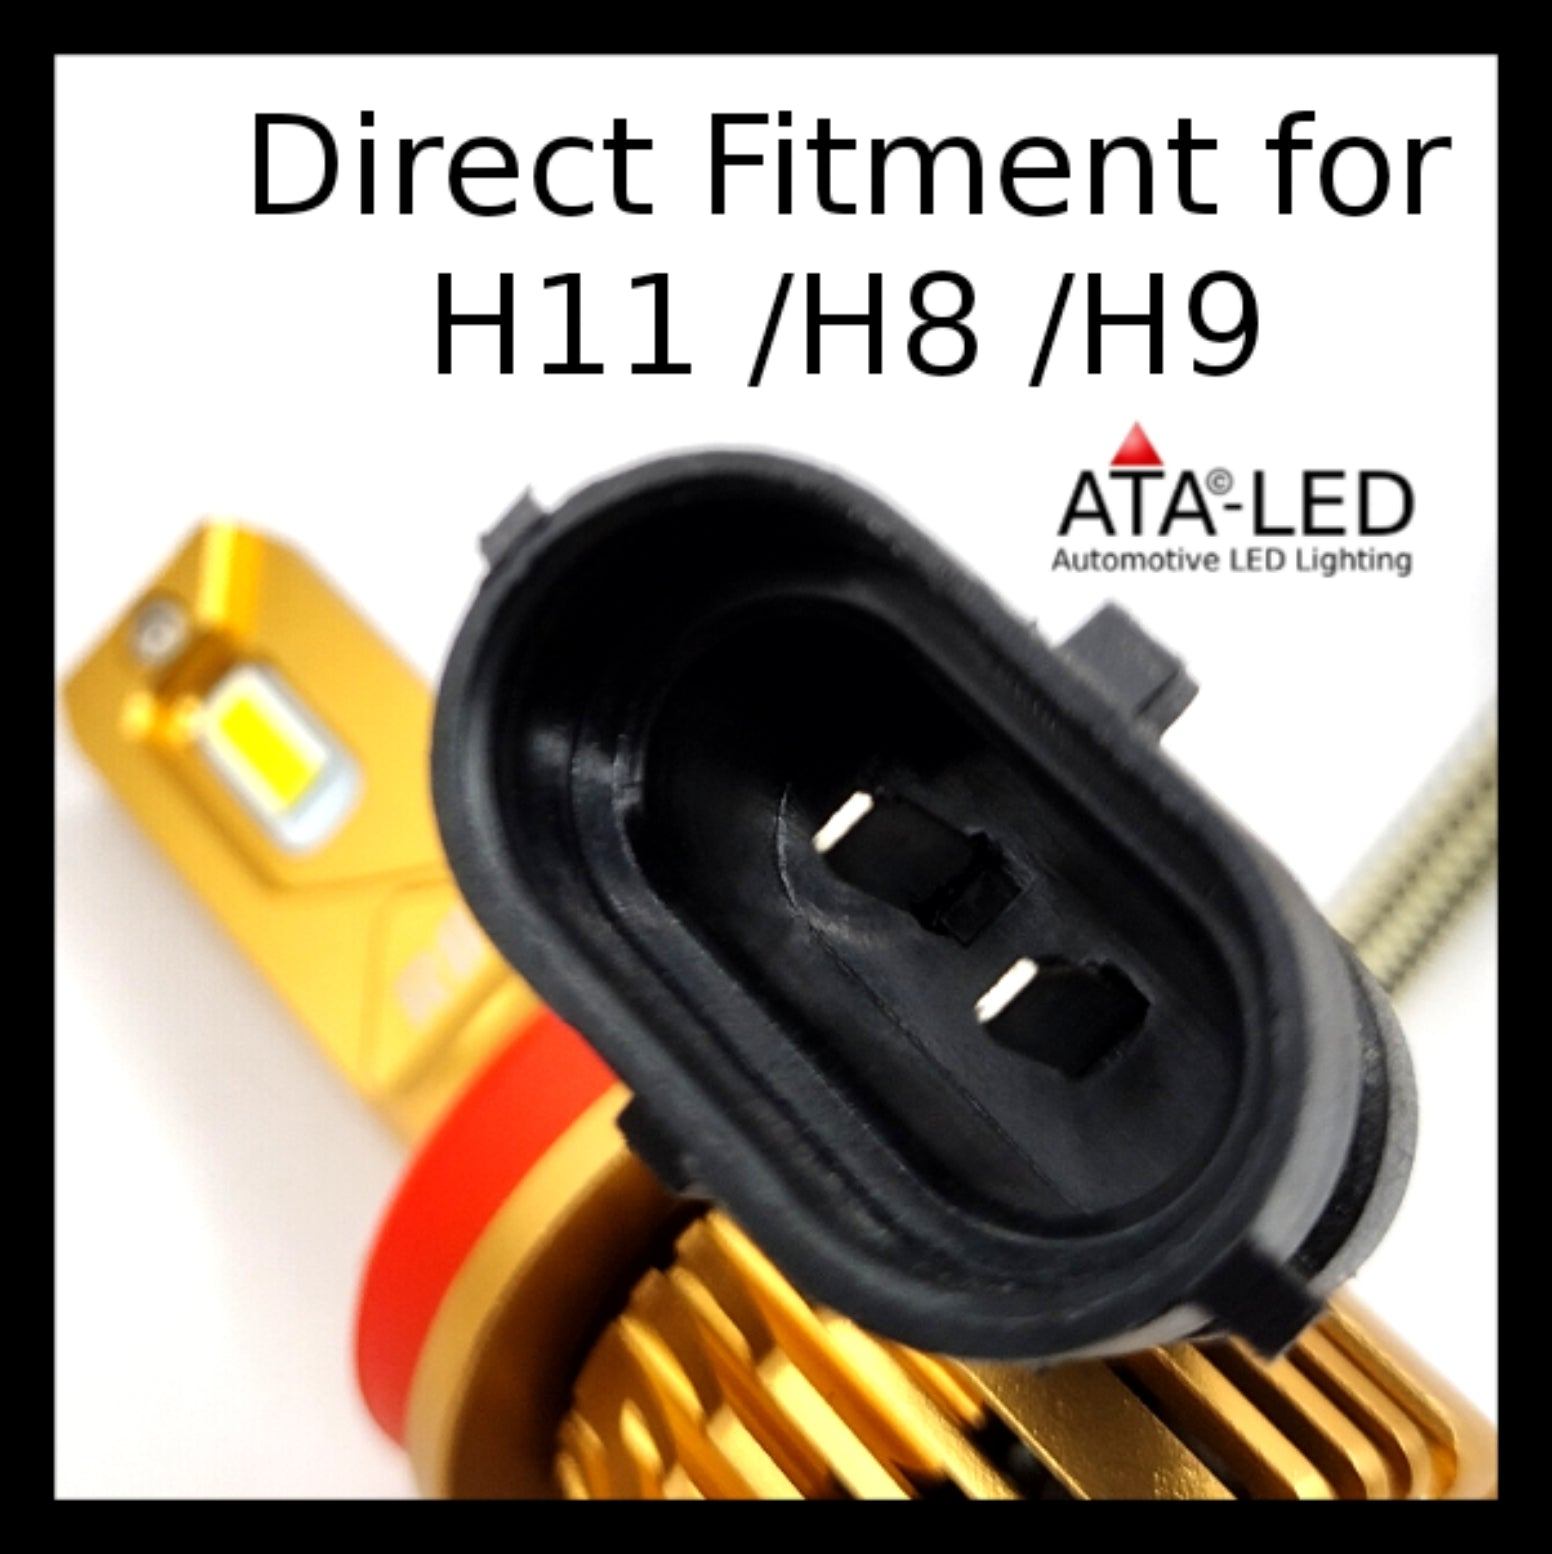 Direct Fitment for H11 H8 H9